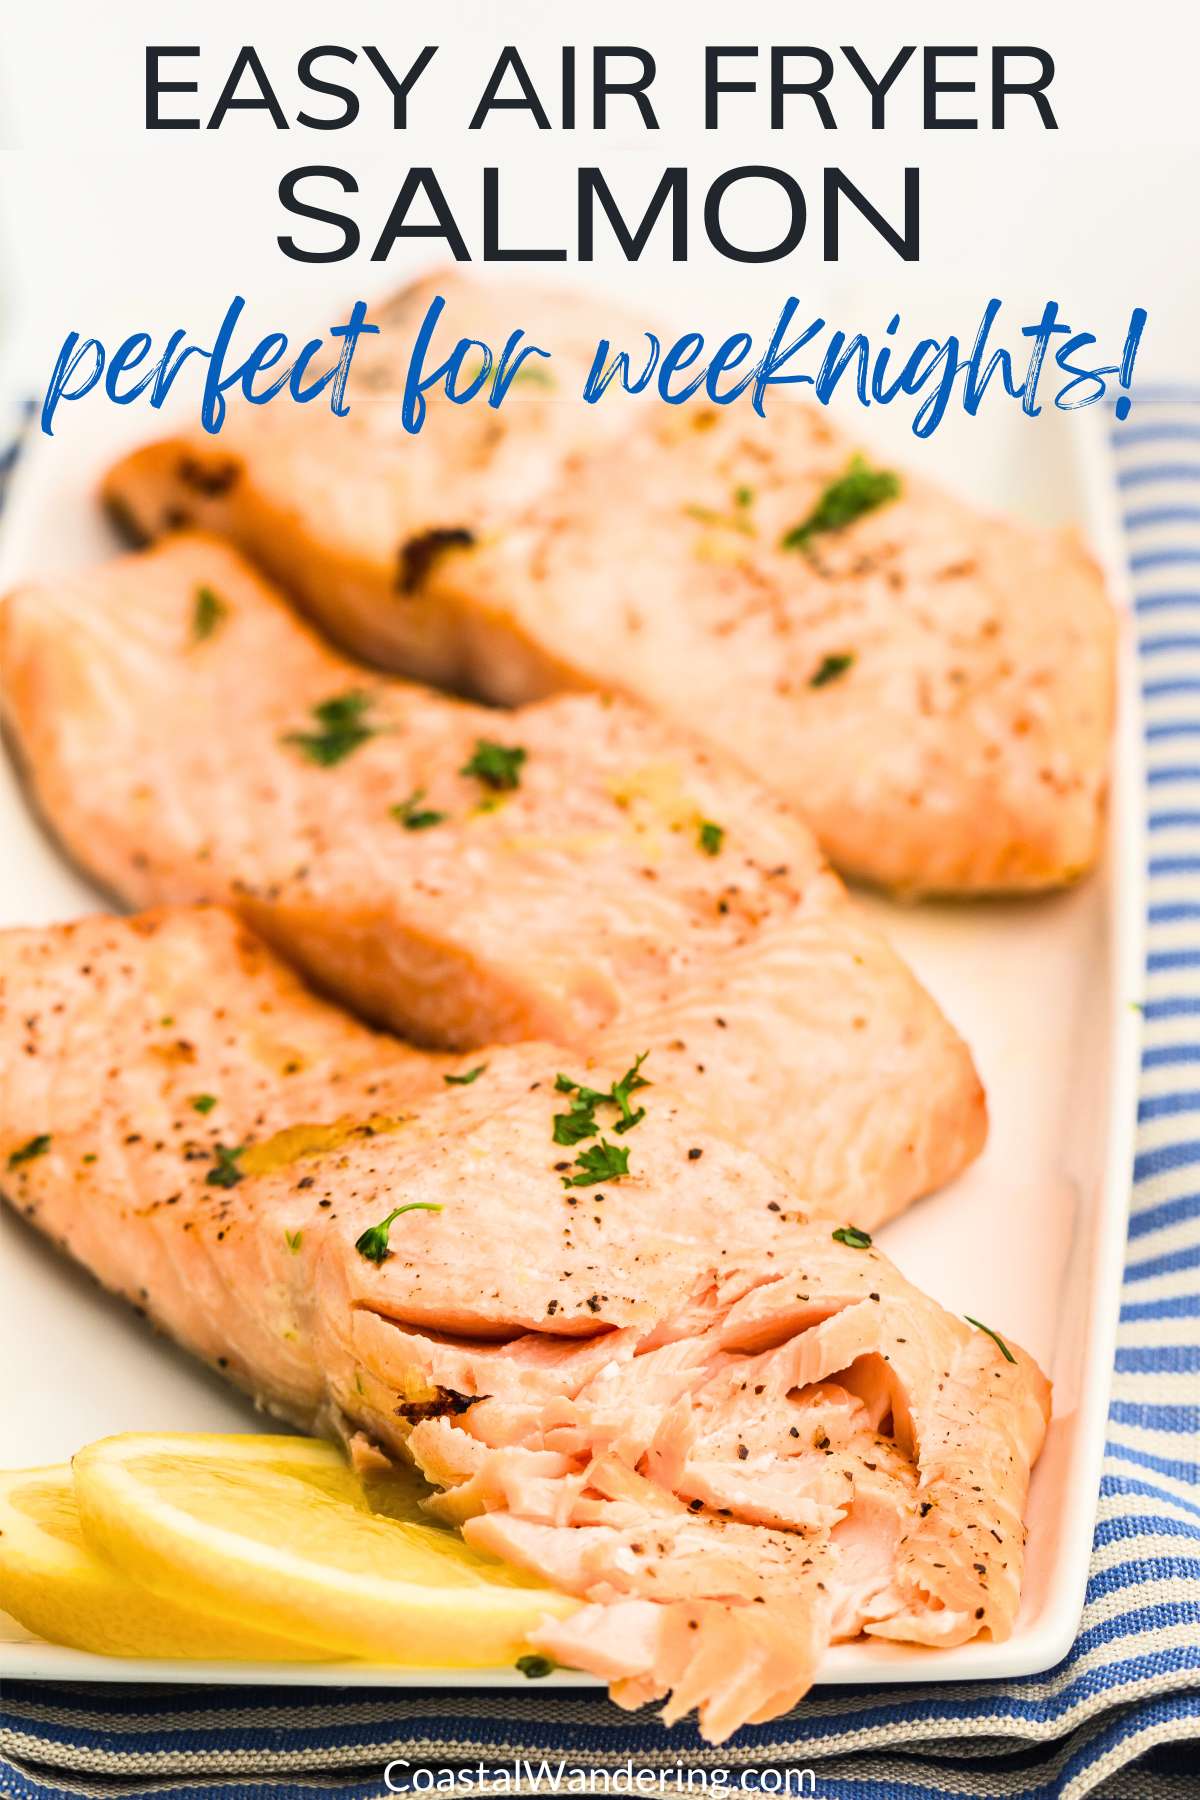 Easy air fryer salmon perfect for weeknights!